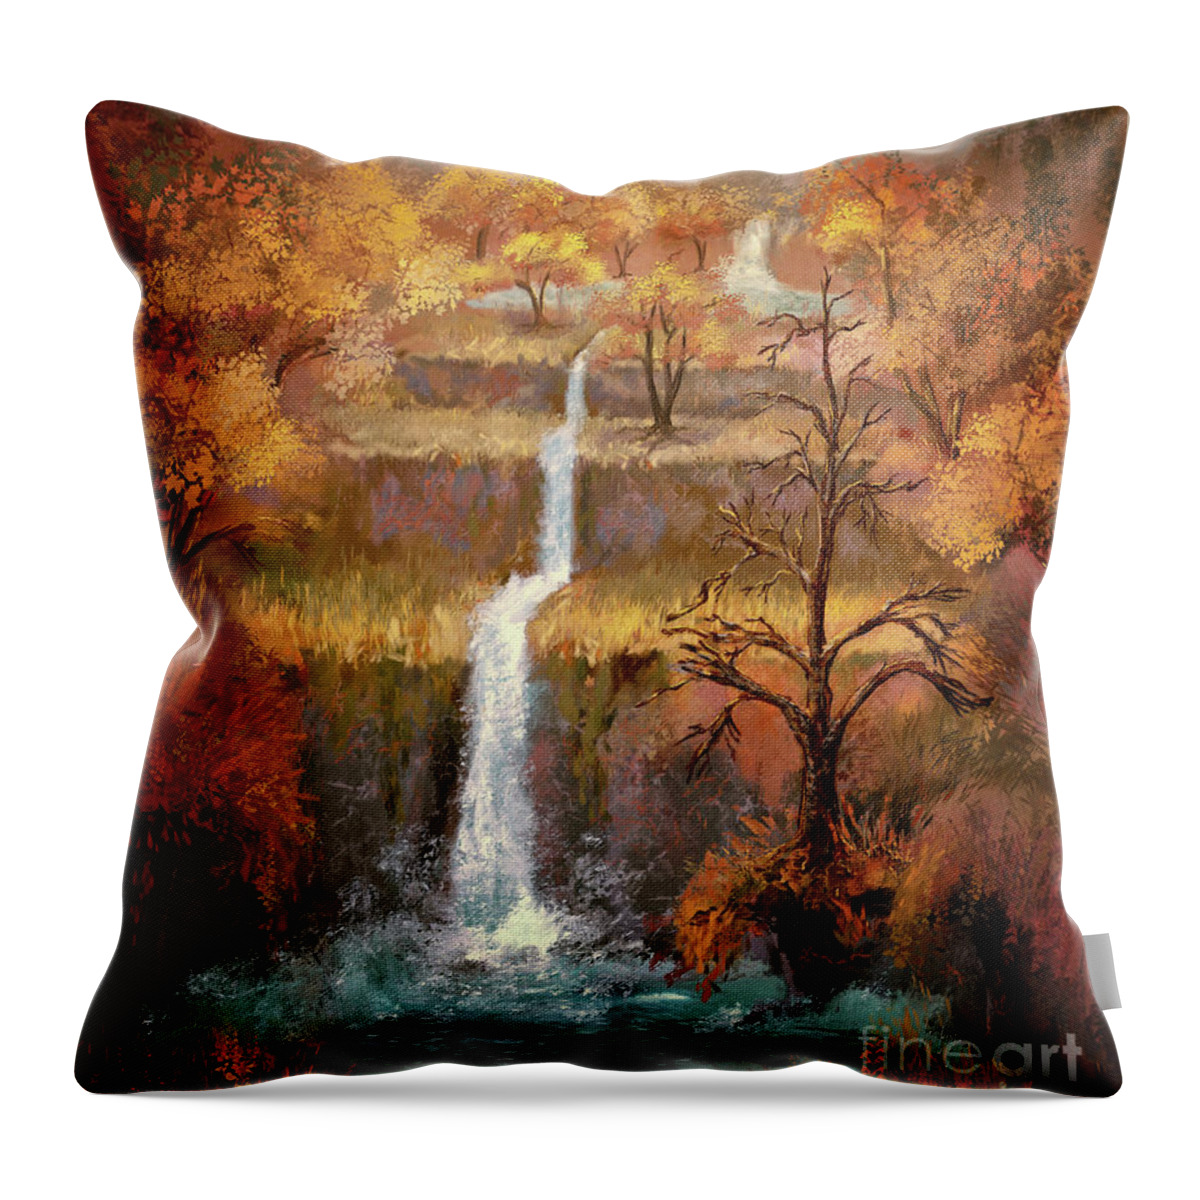 Waterfall Throw Pillow featuring the digital art The Lost Waterfall by Lois Bryan